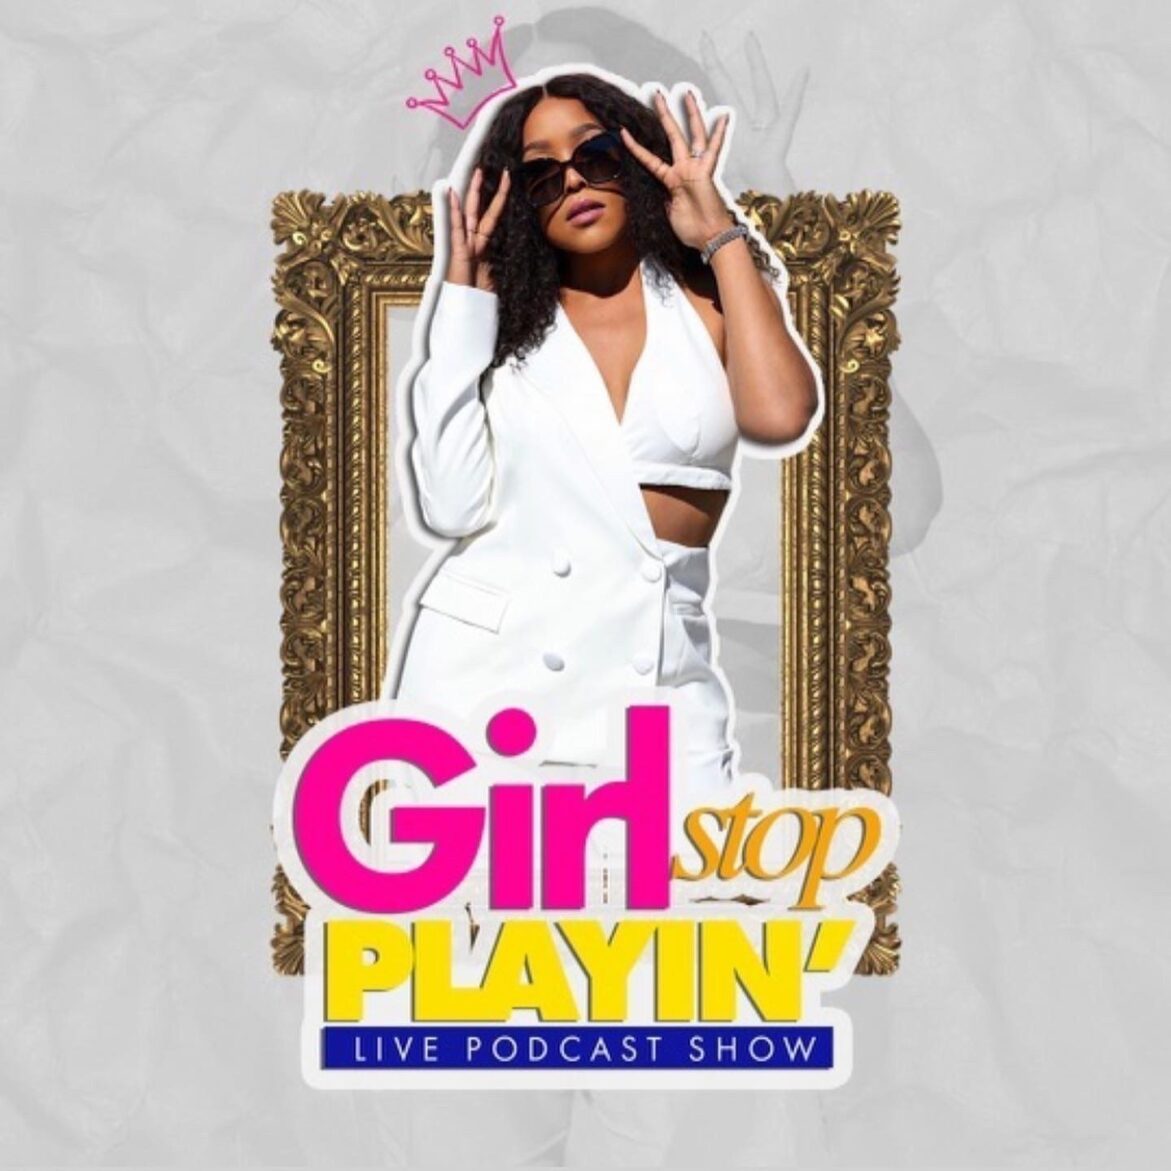 Black Podcasting - I Just Don't Play About Me No More | Koereyelle | Girl Stop Playin' Podcast -Episode 28